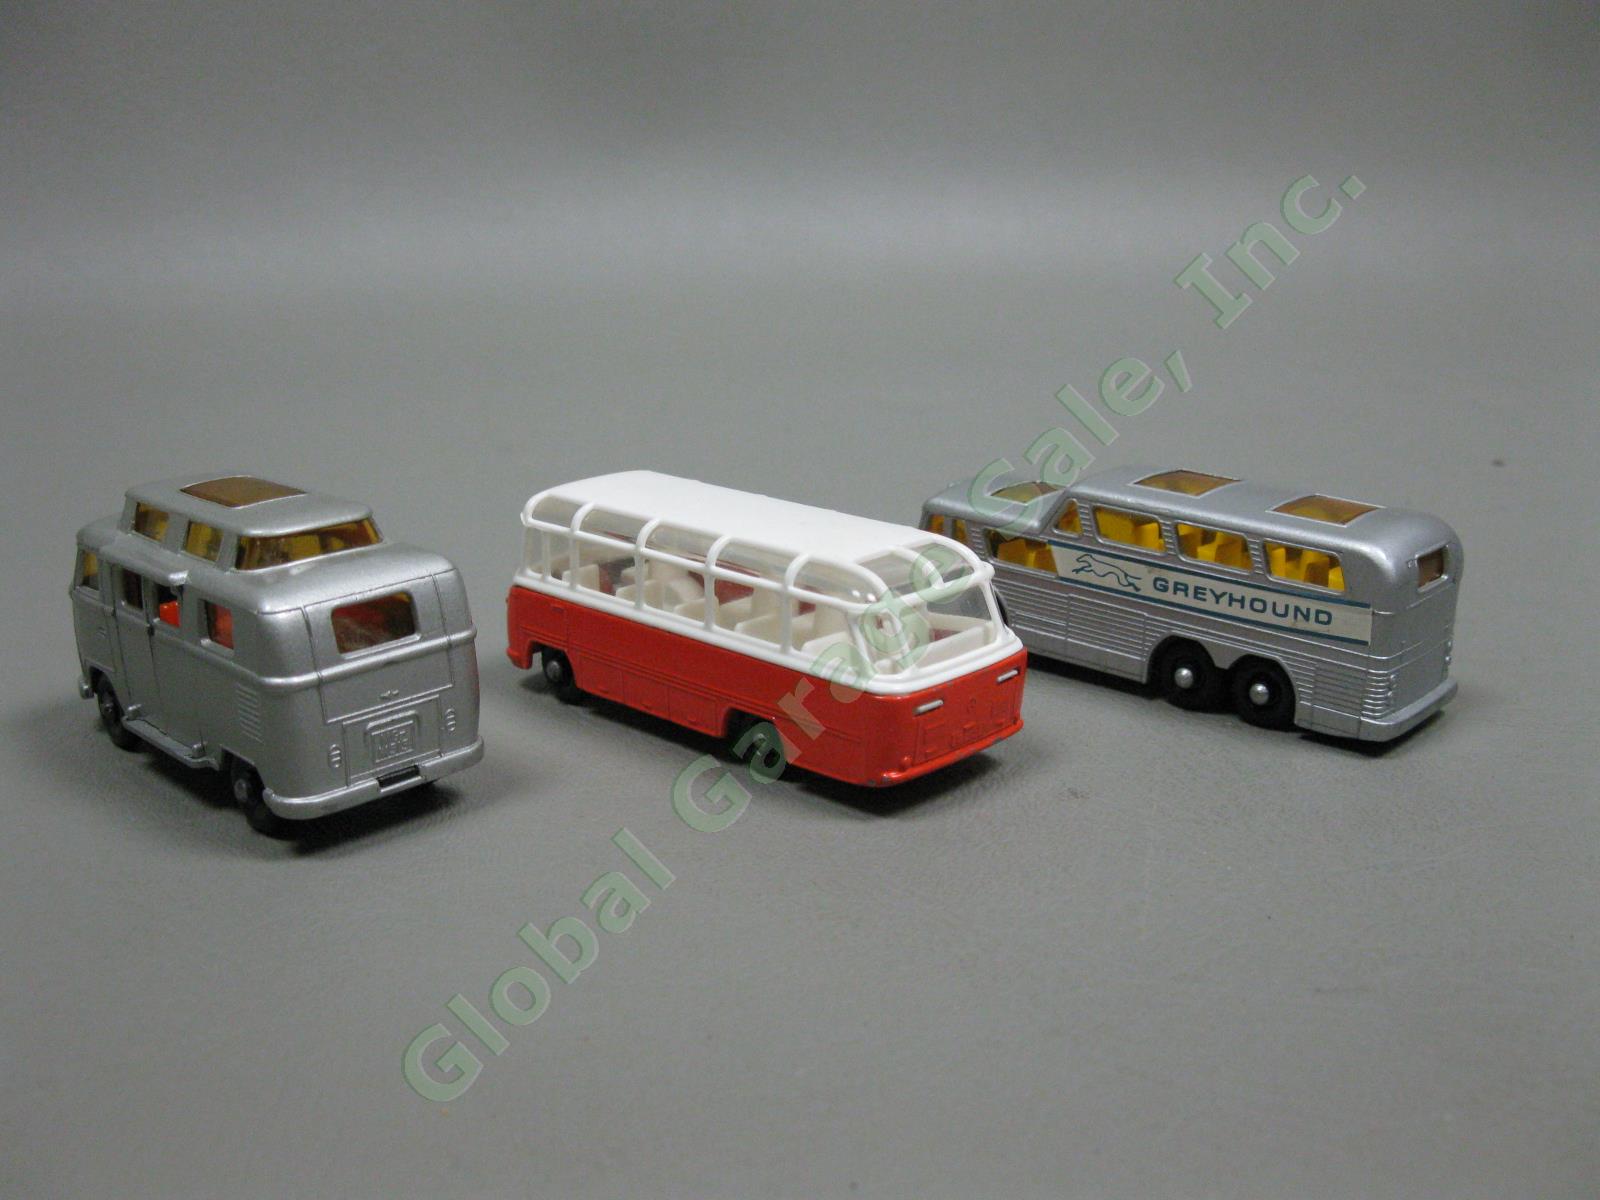 44 Vintage 1950s-1960s Lesney Matchbox Moko Toy Car Lot + Carrying Case EXC COND 24